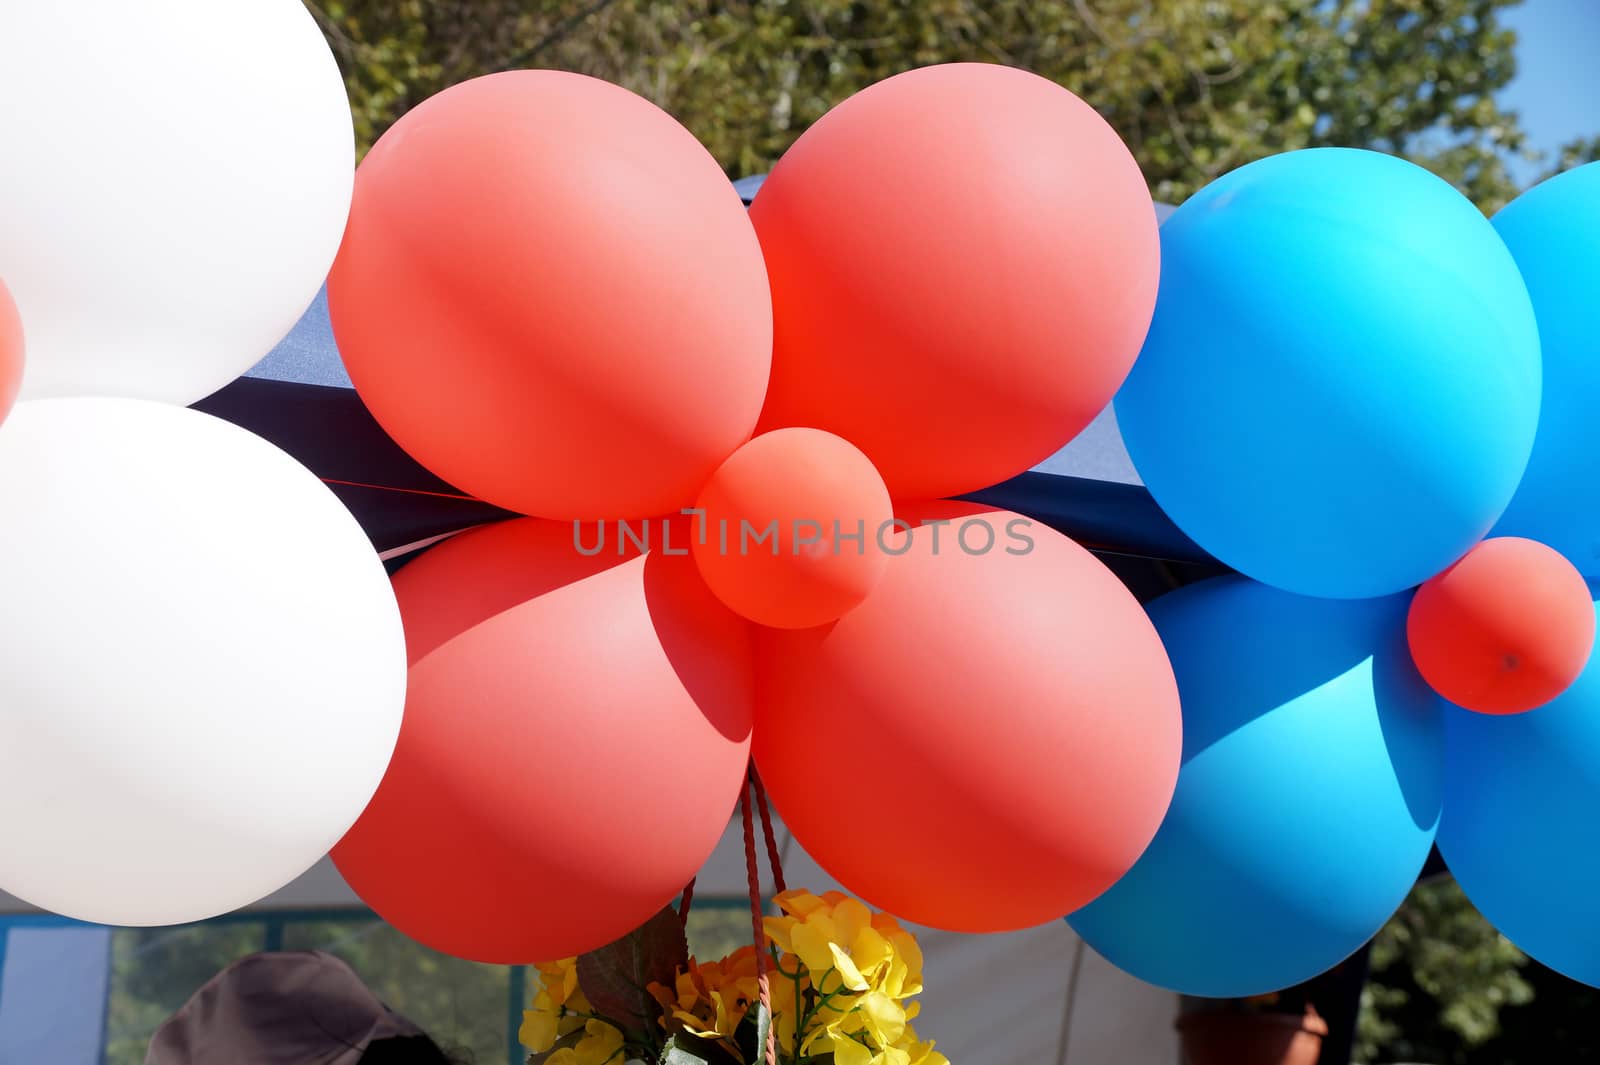 Multi-colored balloons in several colors by Vadimdem